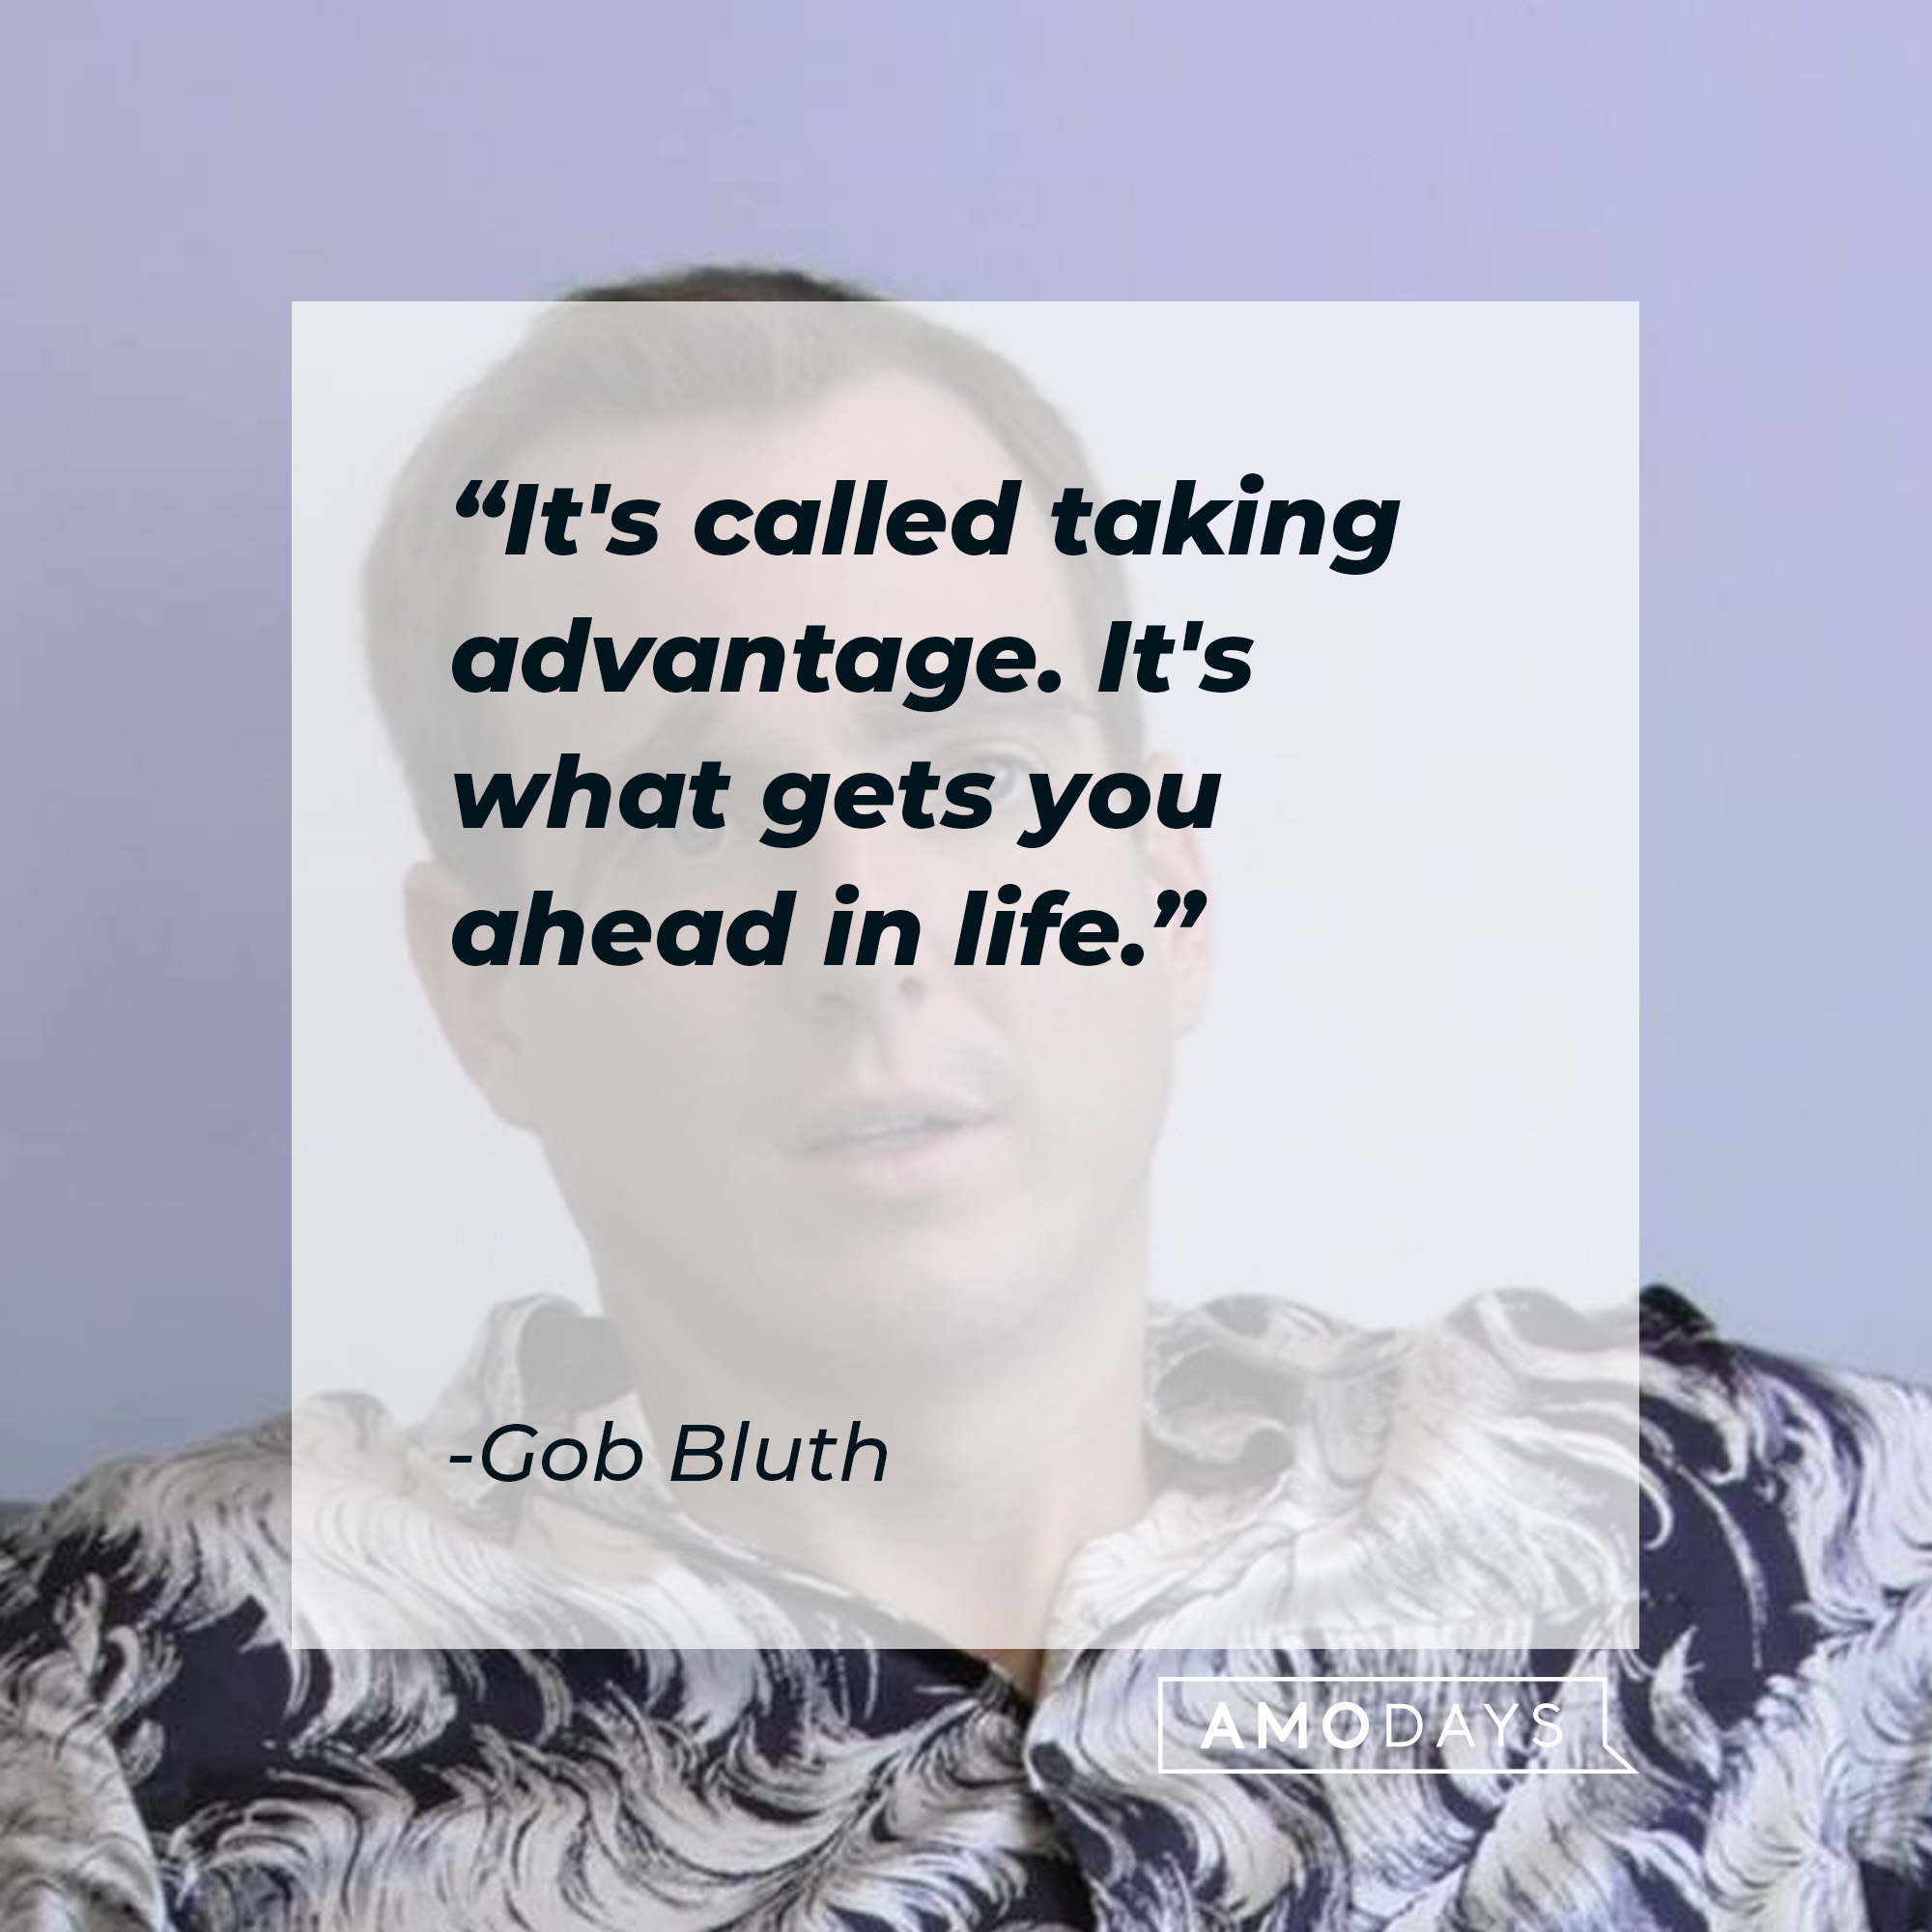 Gob Bluth's quote: "It's called taking advantage. It's what gets you ahead in life." | Source: facebook.com/ArrestedDevelopment